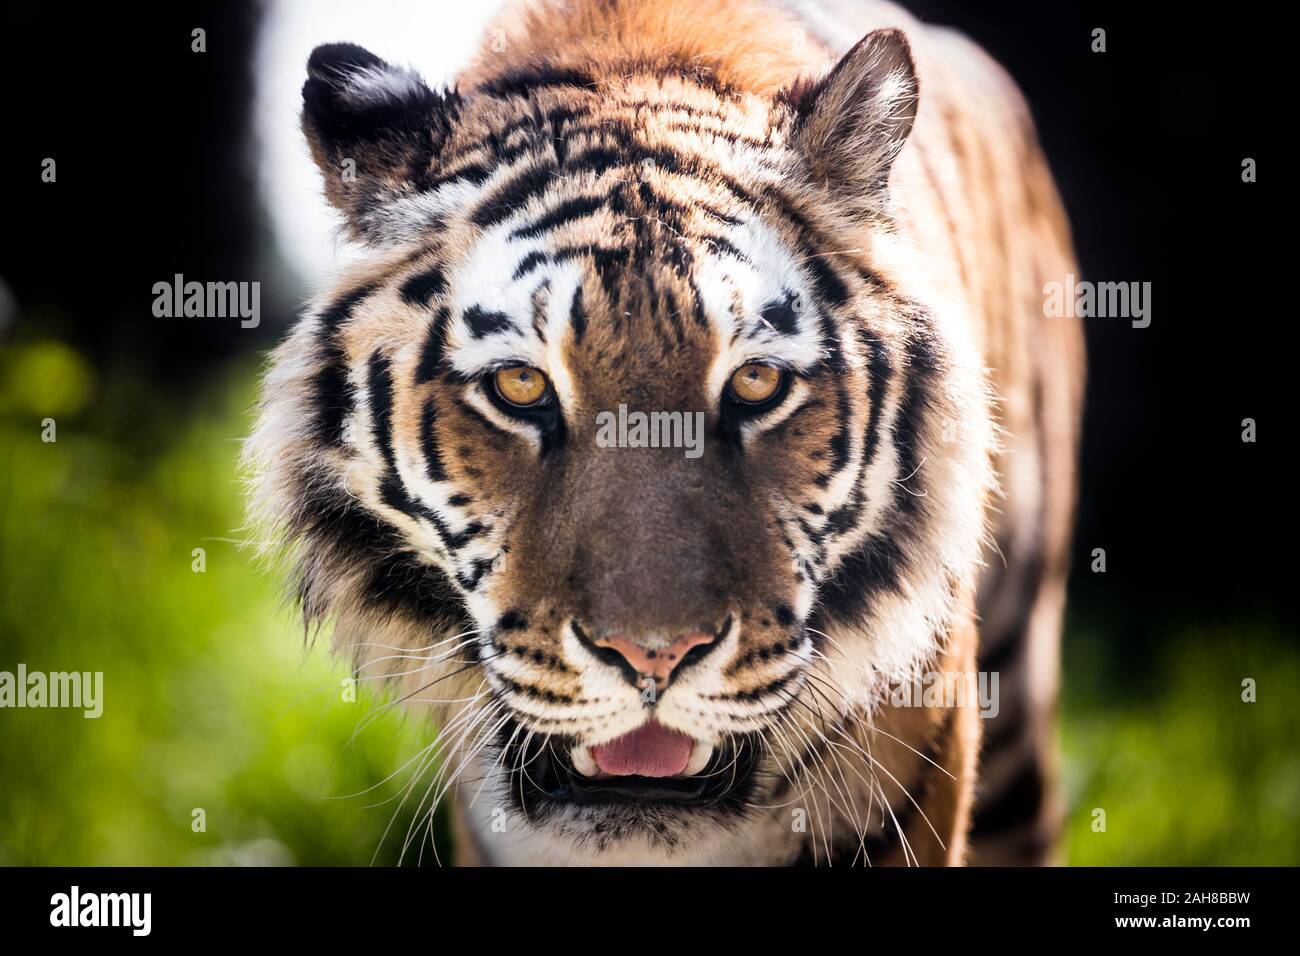 Close up portrait of an adult tiger walking and staring back at the camera, against a green bokeh background Stock Photo